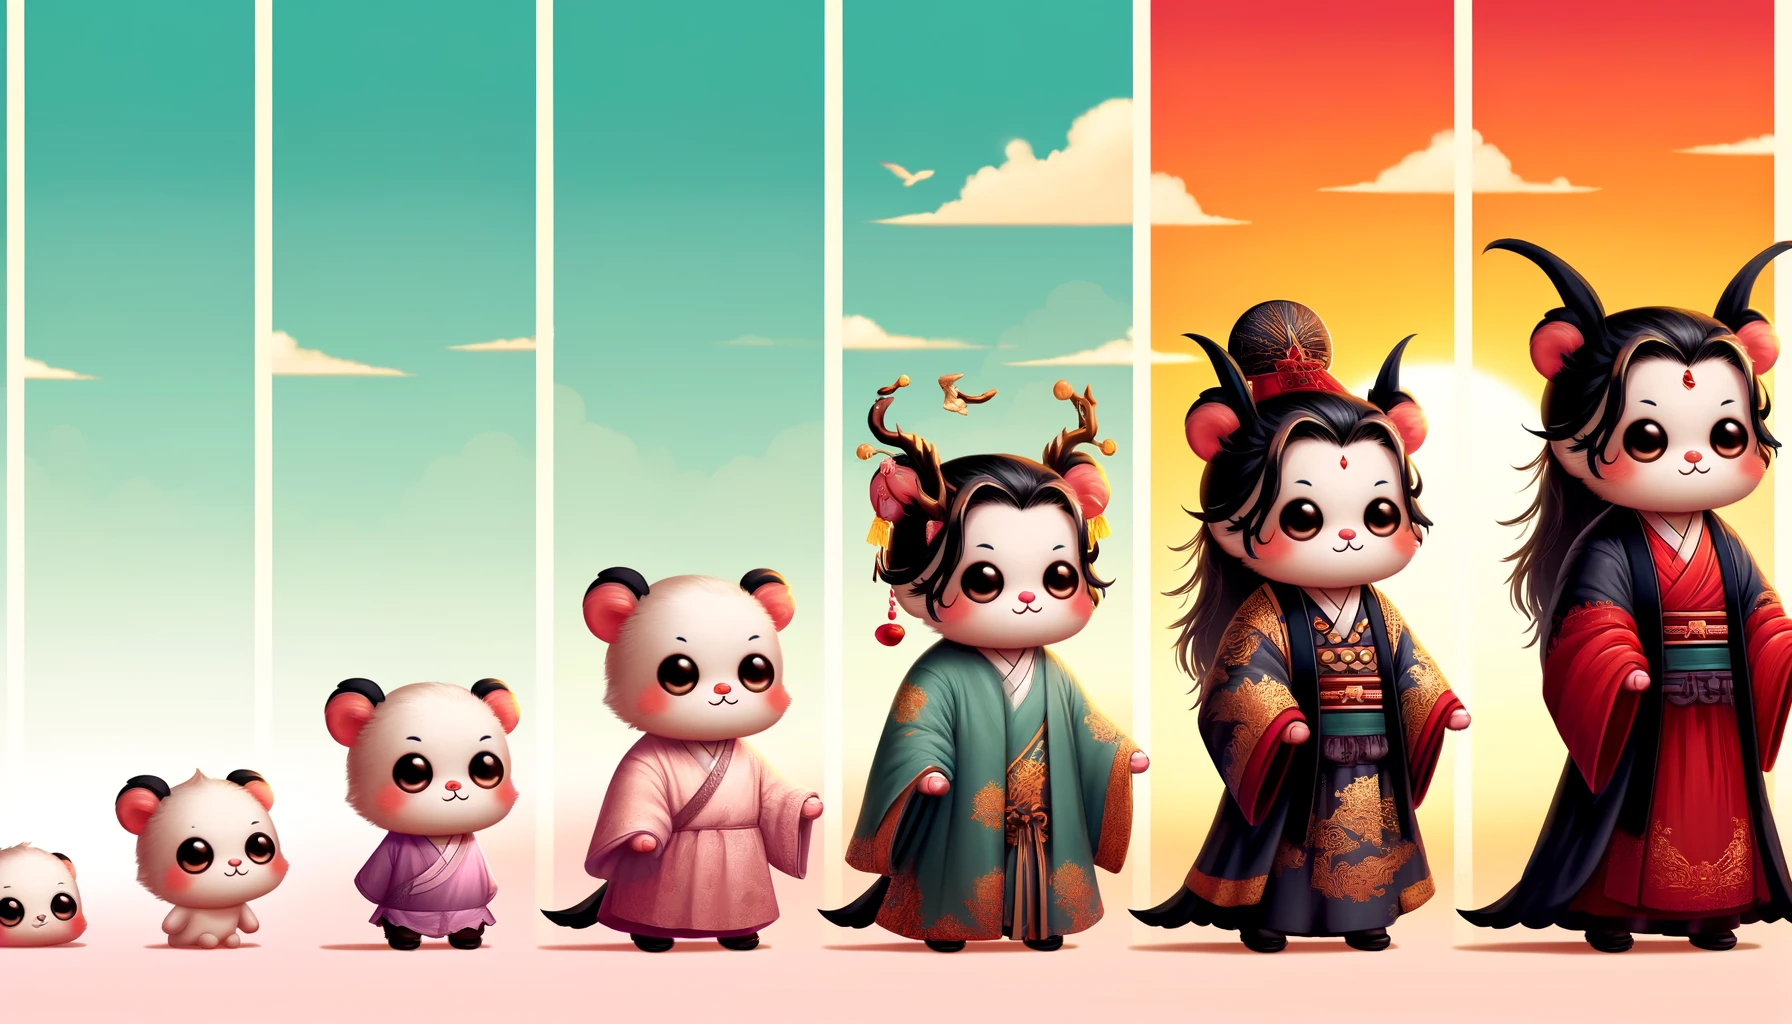 A creative depiction of the evolution of a cute baby Jiangshi through three stages, arranged in a single wide image. The first stage shows the baby Jiangshi as tiny and adorable with a playful expression, dressed in a miniature traditional robe. The second stage depicts it slightly older, more confident, and wearing a more ornate robe with intricate designs. The final stage presents the baby Jiangshi as a young adult, powerful and majestic, with a regal robe and an imposing stance. The background transitions from a soft, pastel morning landscape to a vivid, sunset evening scene, symbolizing growth and progression.